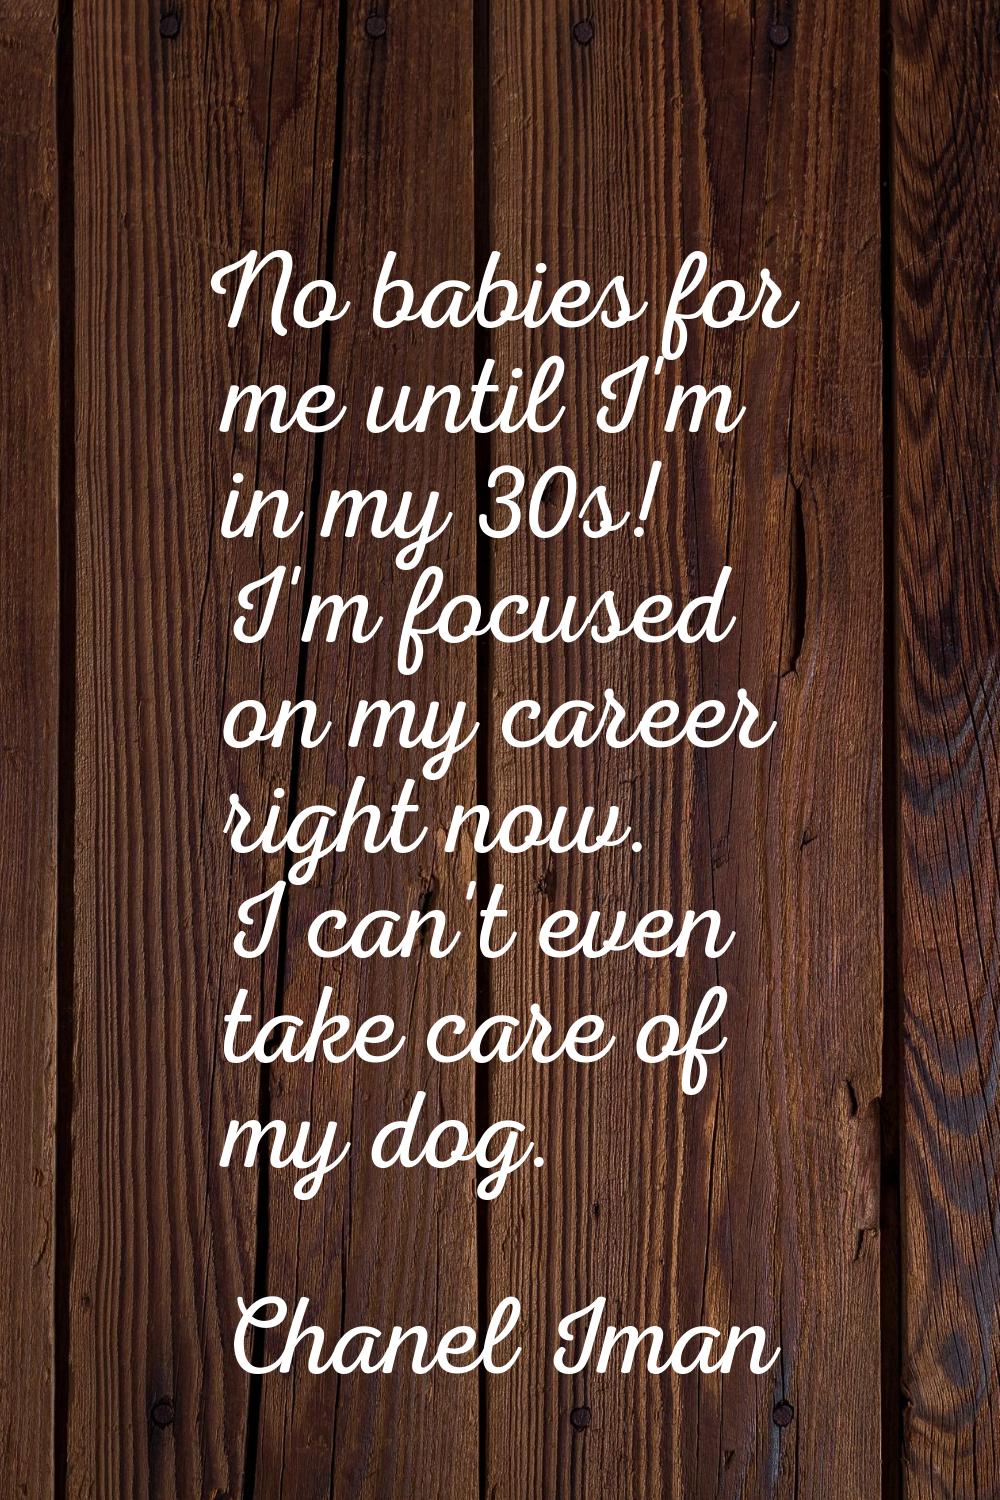 No babies for me until I'm in my 30s! I'm focused on my career right now. I can't even take care of